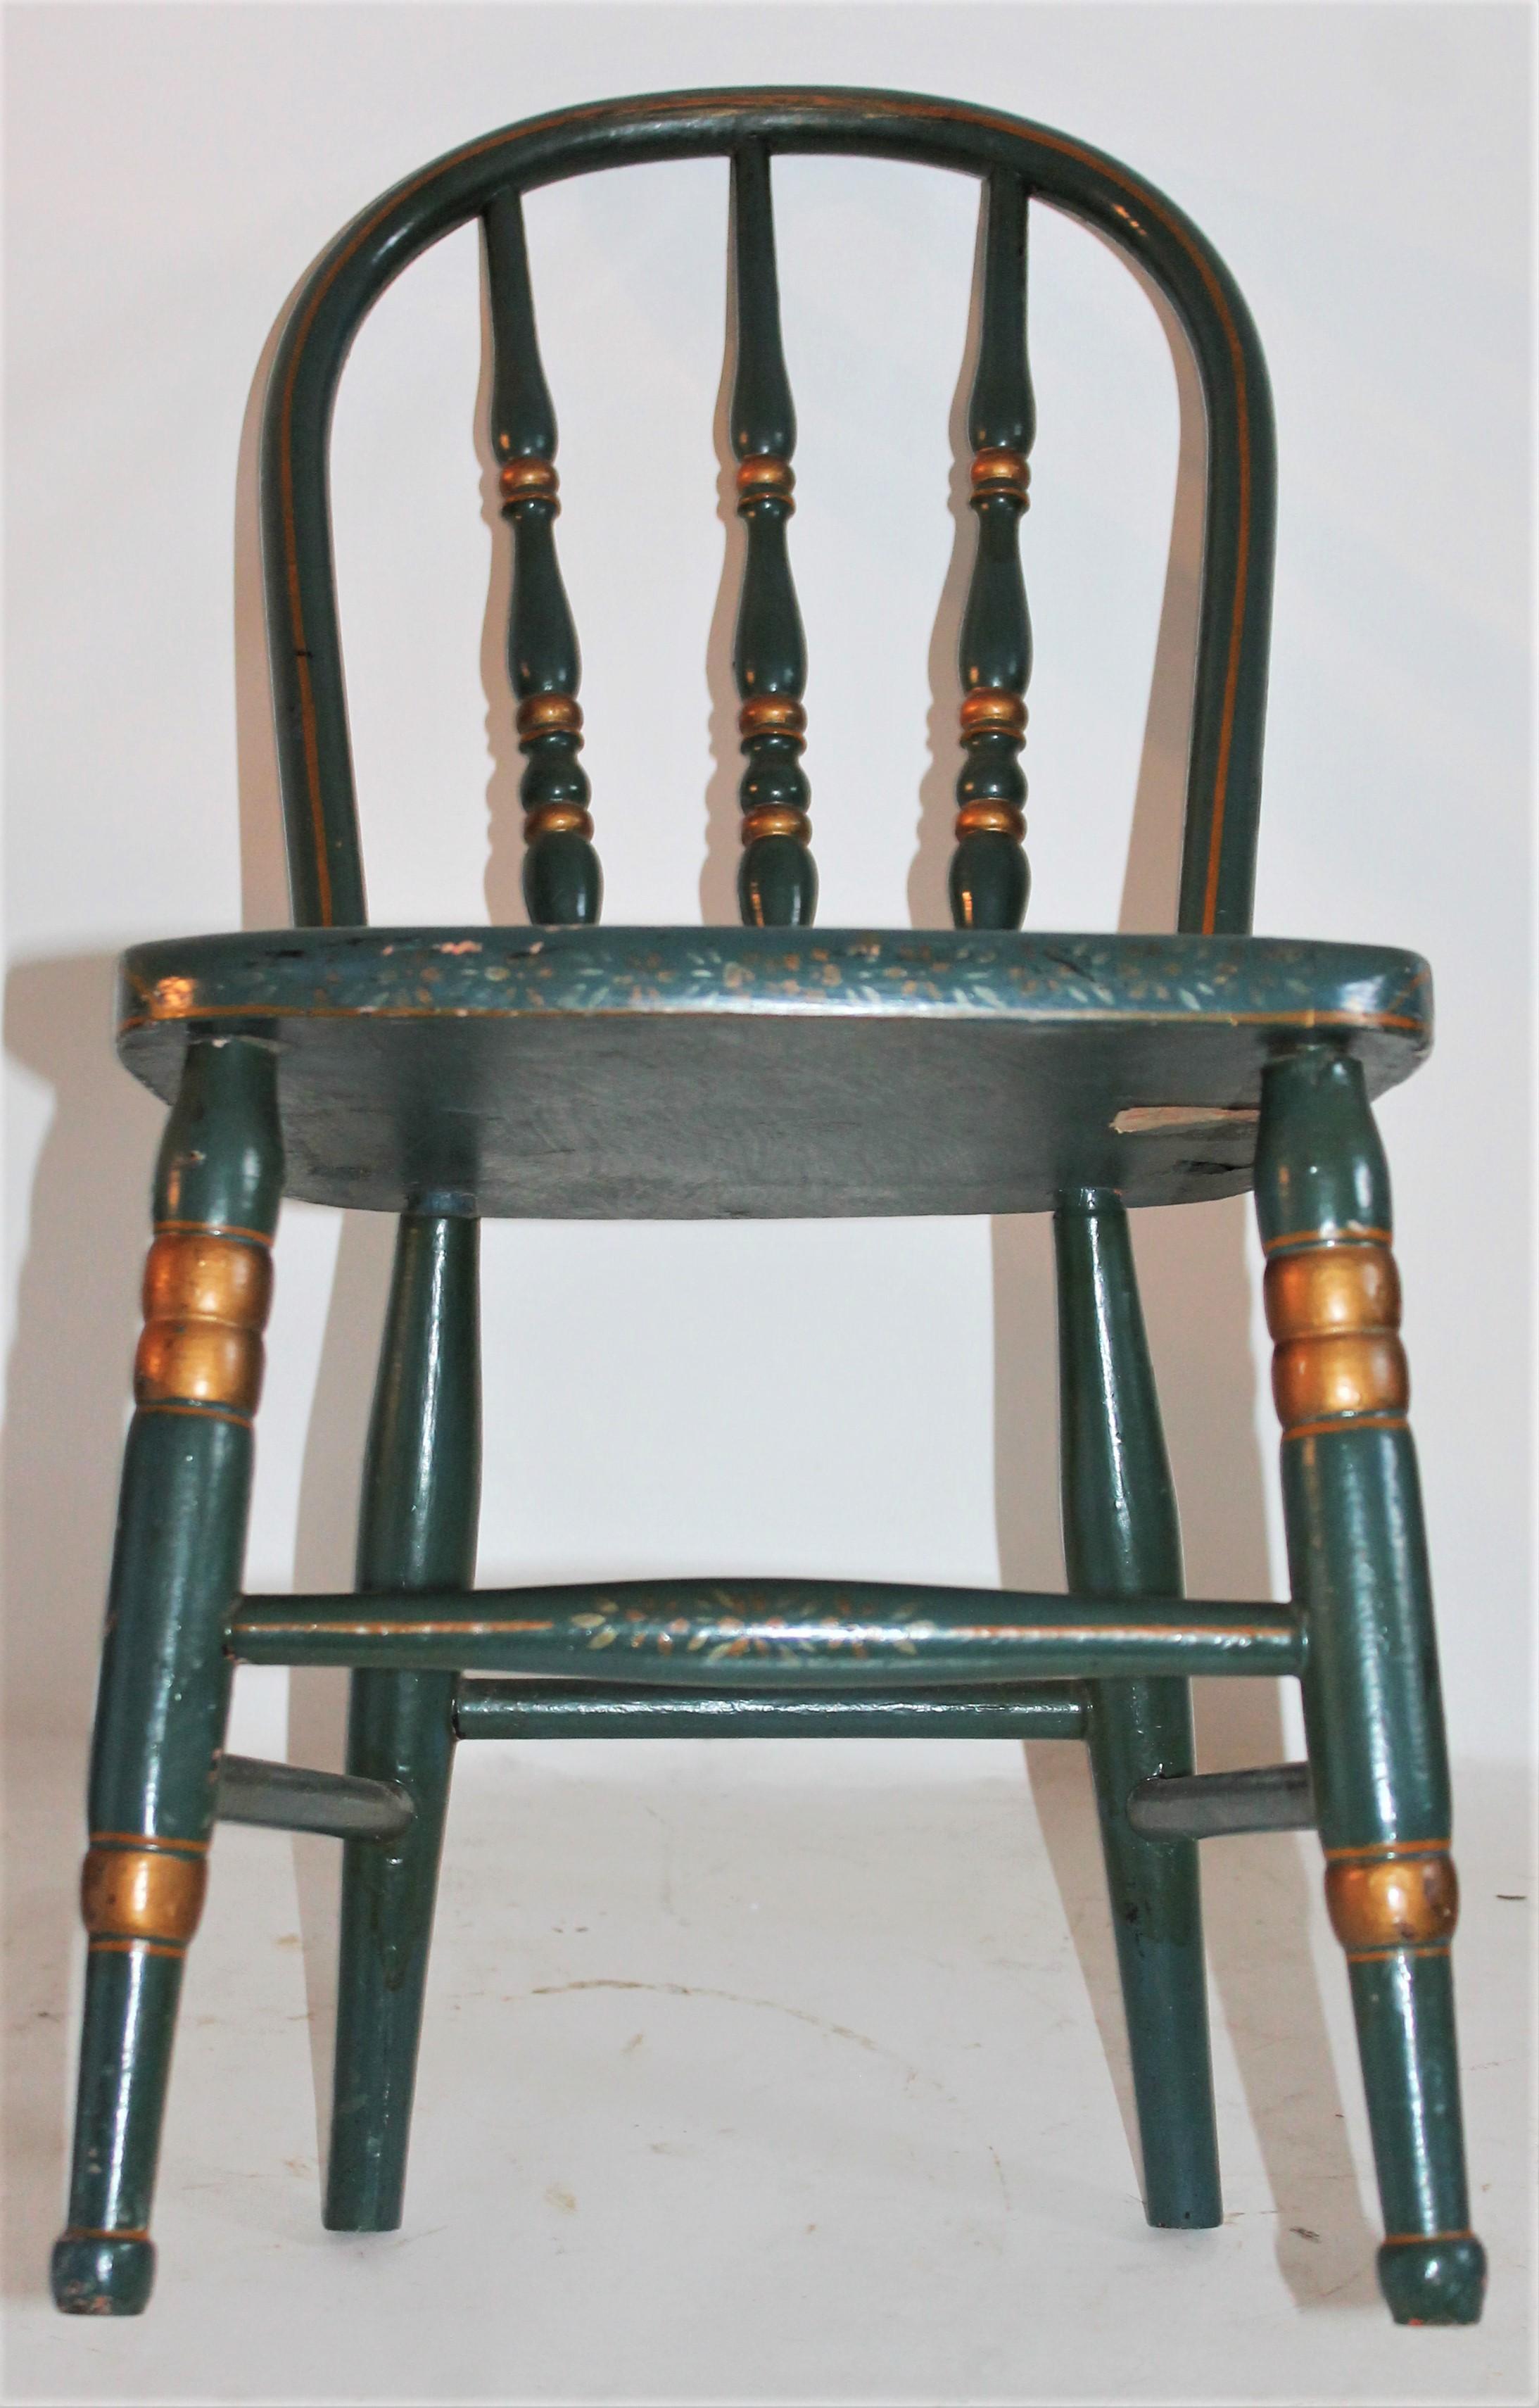 Hand-Crafted 19th Century Children's Painted Chair For Sale